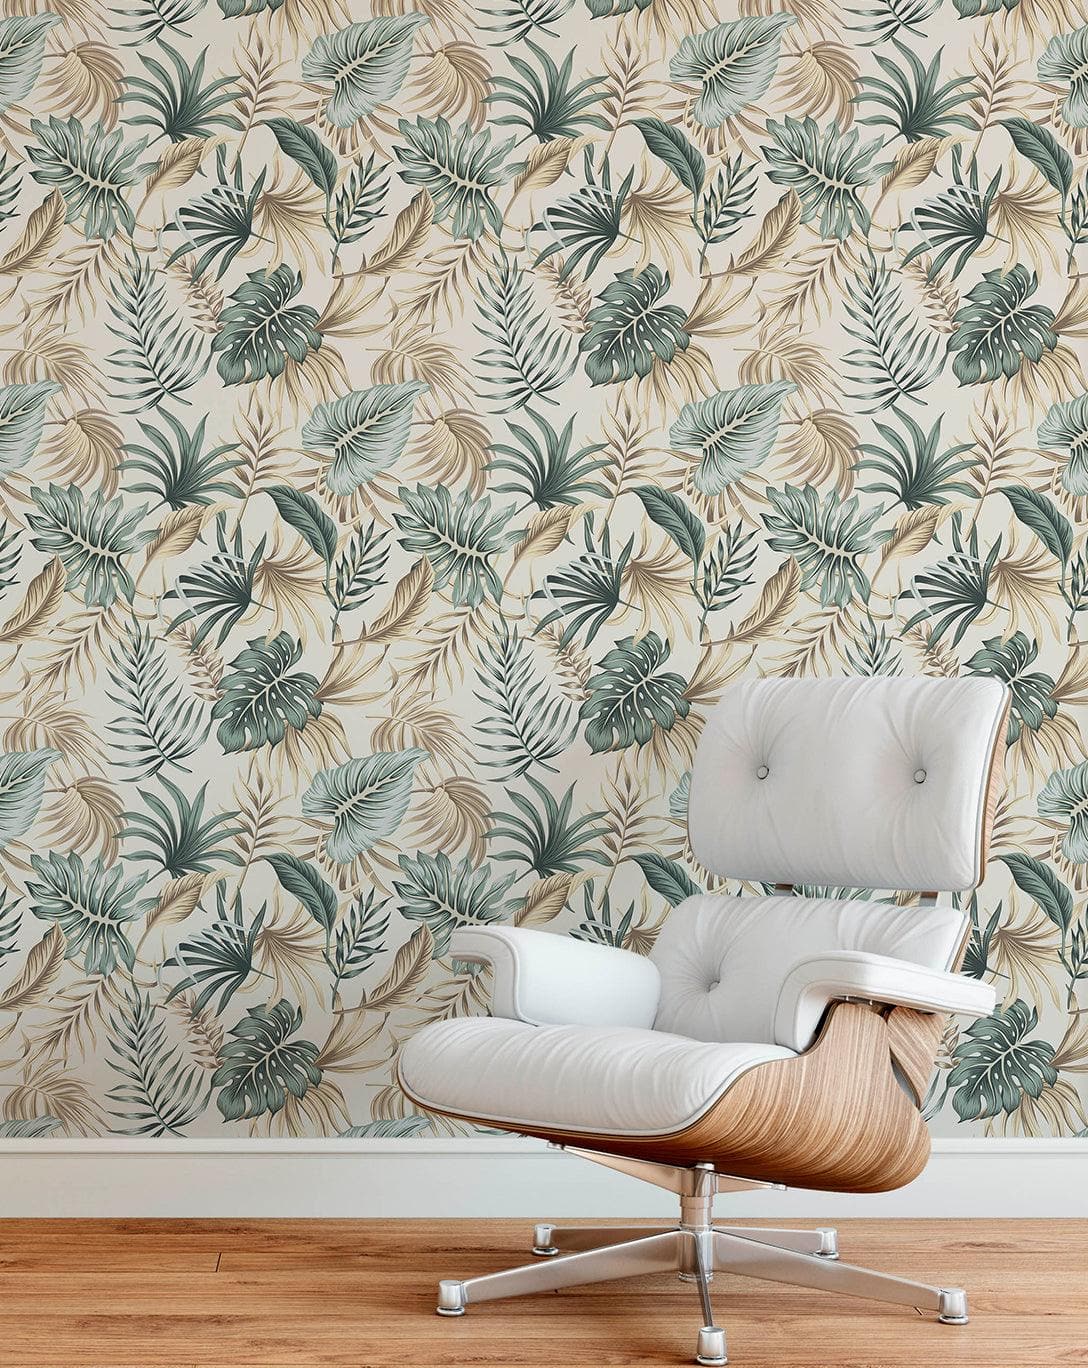 Monstera Palm Leaves Sketch Removable Wallpaper Green Palm Leaves Tropical Boho Watercolor Wallpaper Green Palm Leaves Tropical Boho Watercolor Wallpaper 